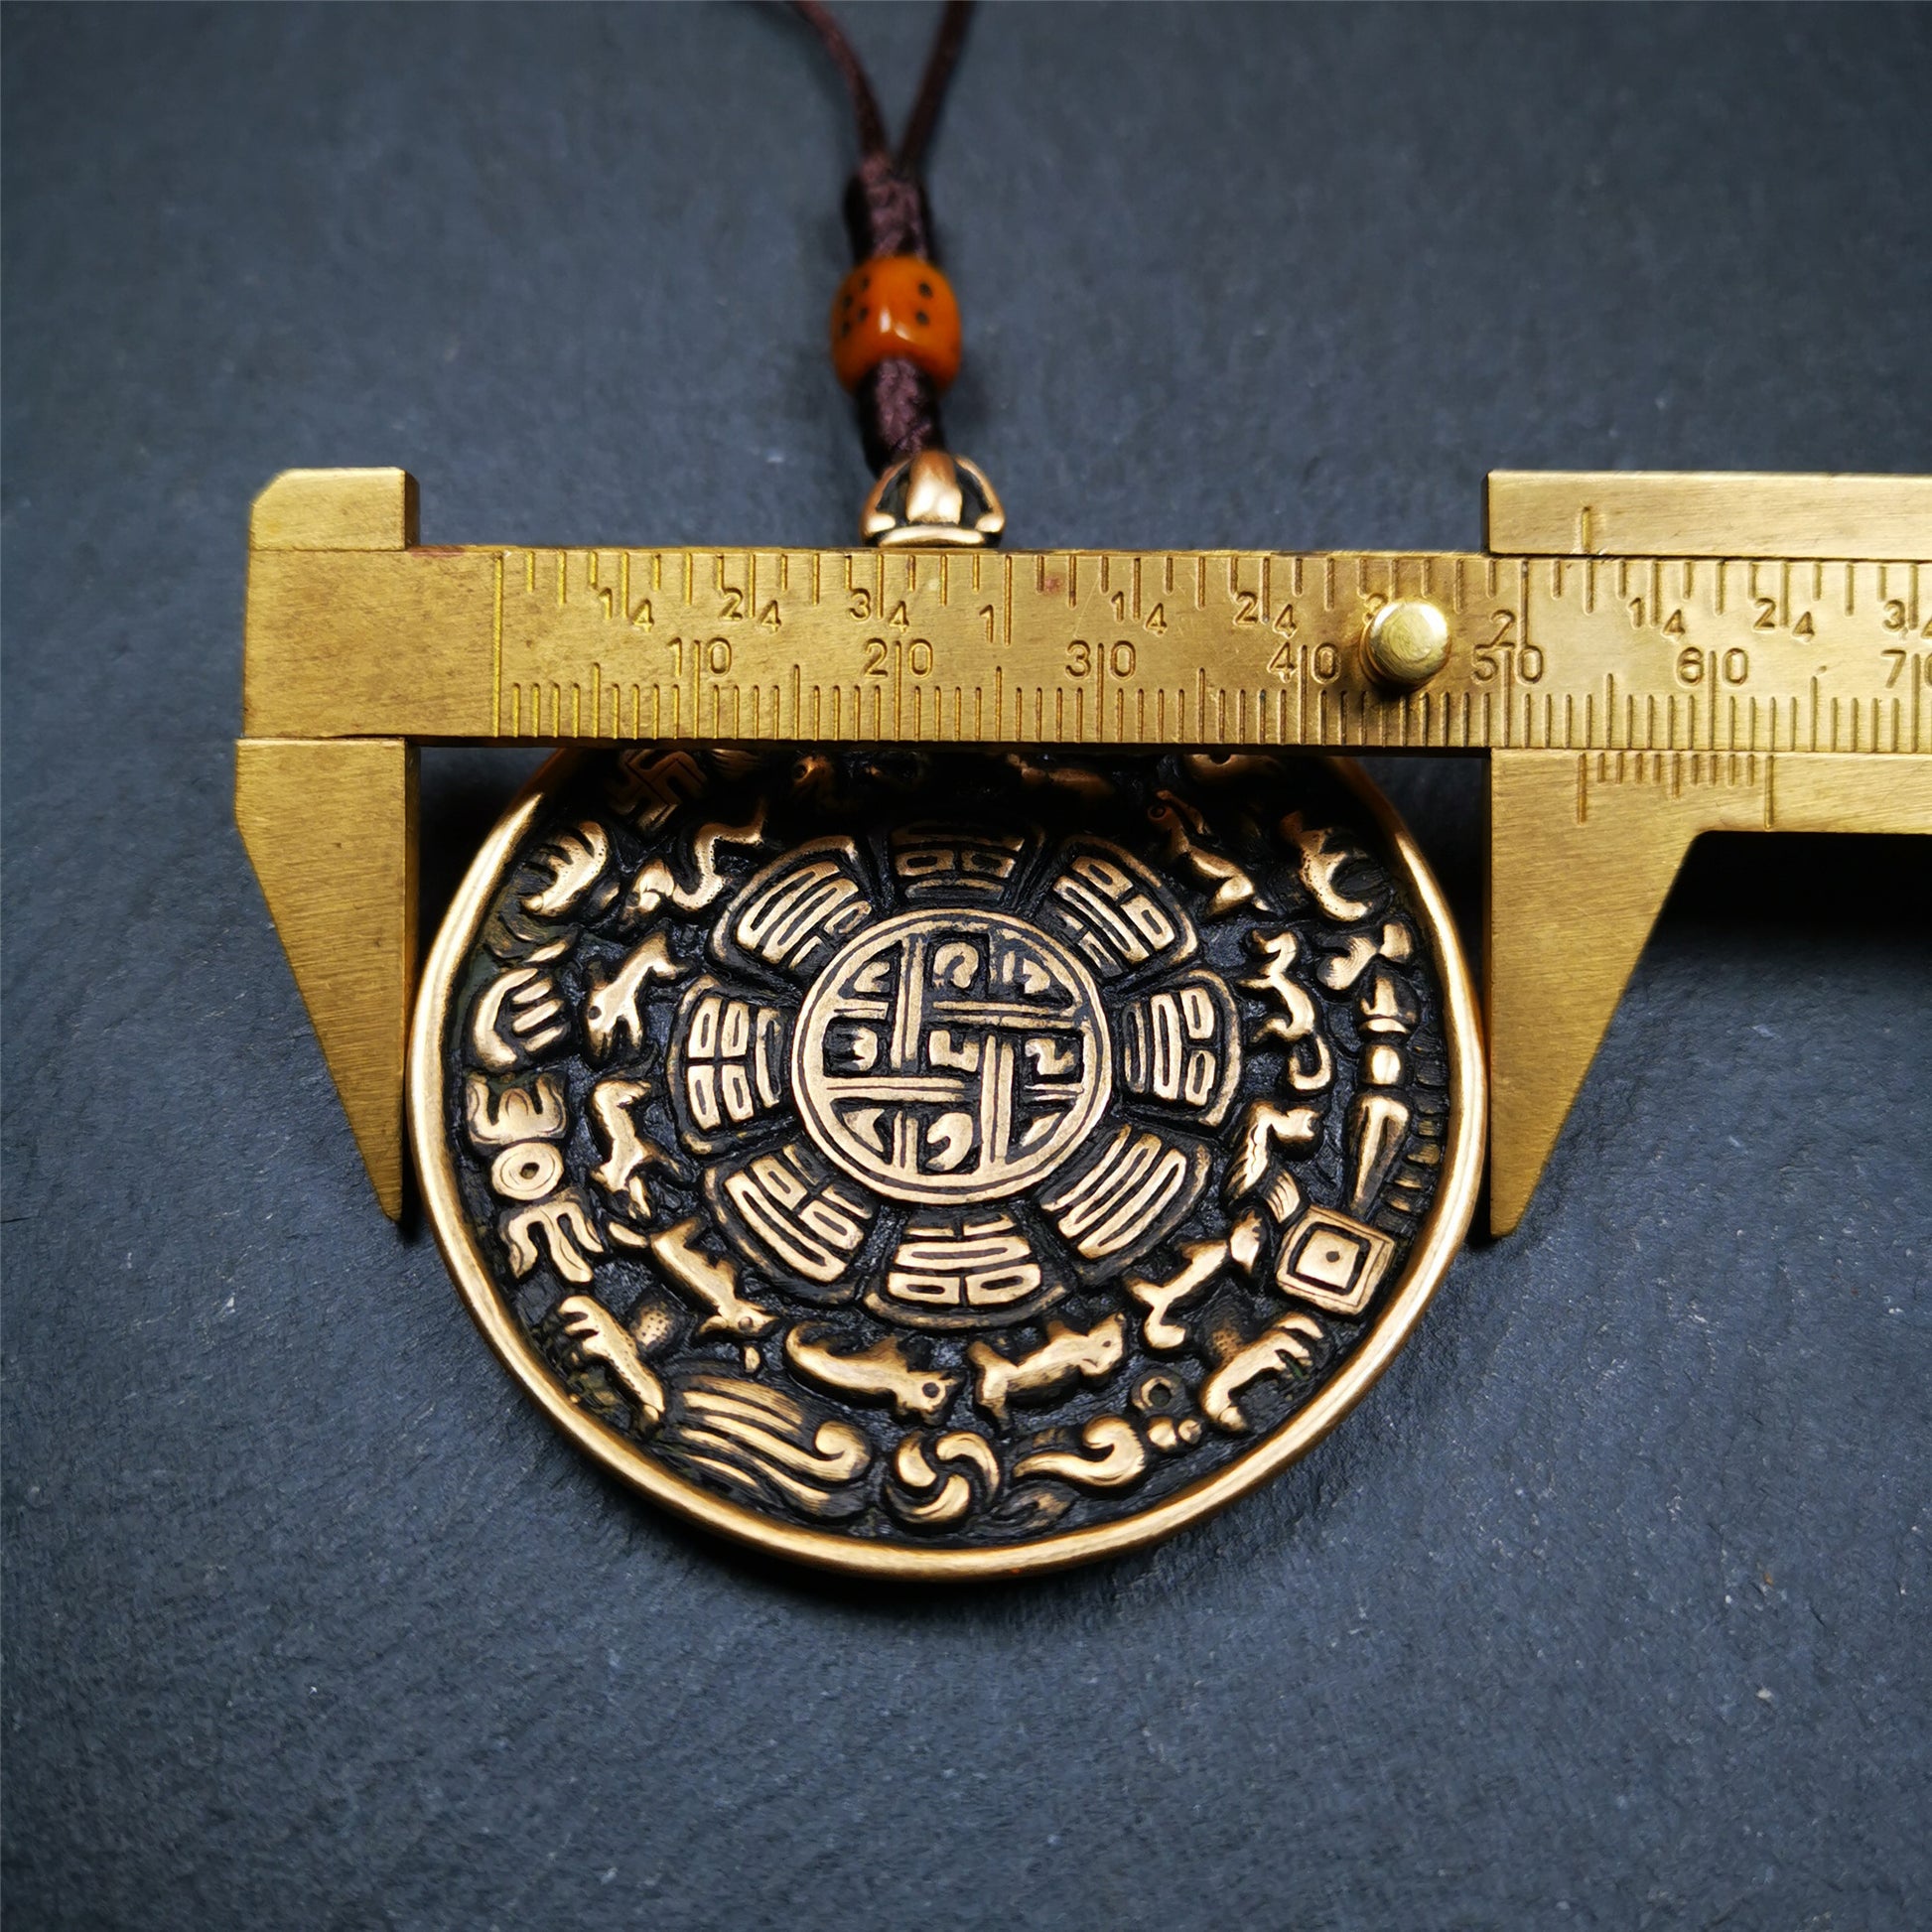 This unique tibetan melong badge was handmade by Tibetan Artist from Baiyu County. It's a Astrology Protective Amulet Pendant,made of brass,the front pattern is Tibetan Budhist Protective Amulet Pendant - SIPAHO(srid pa ho),a bone carved dice bead in the middle of the lanyard.